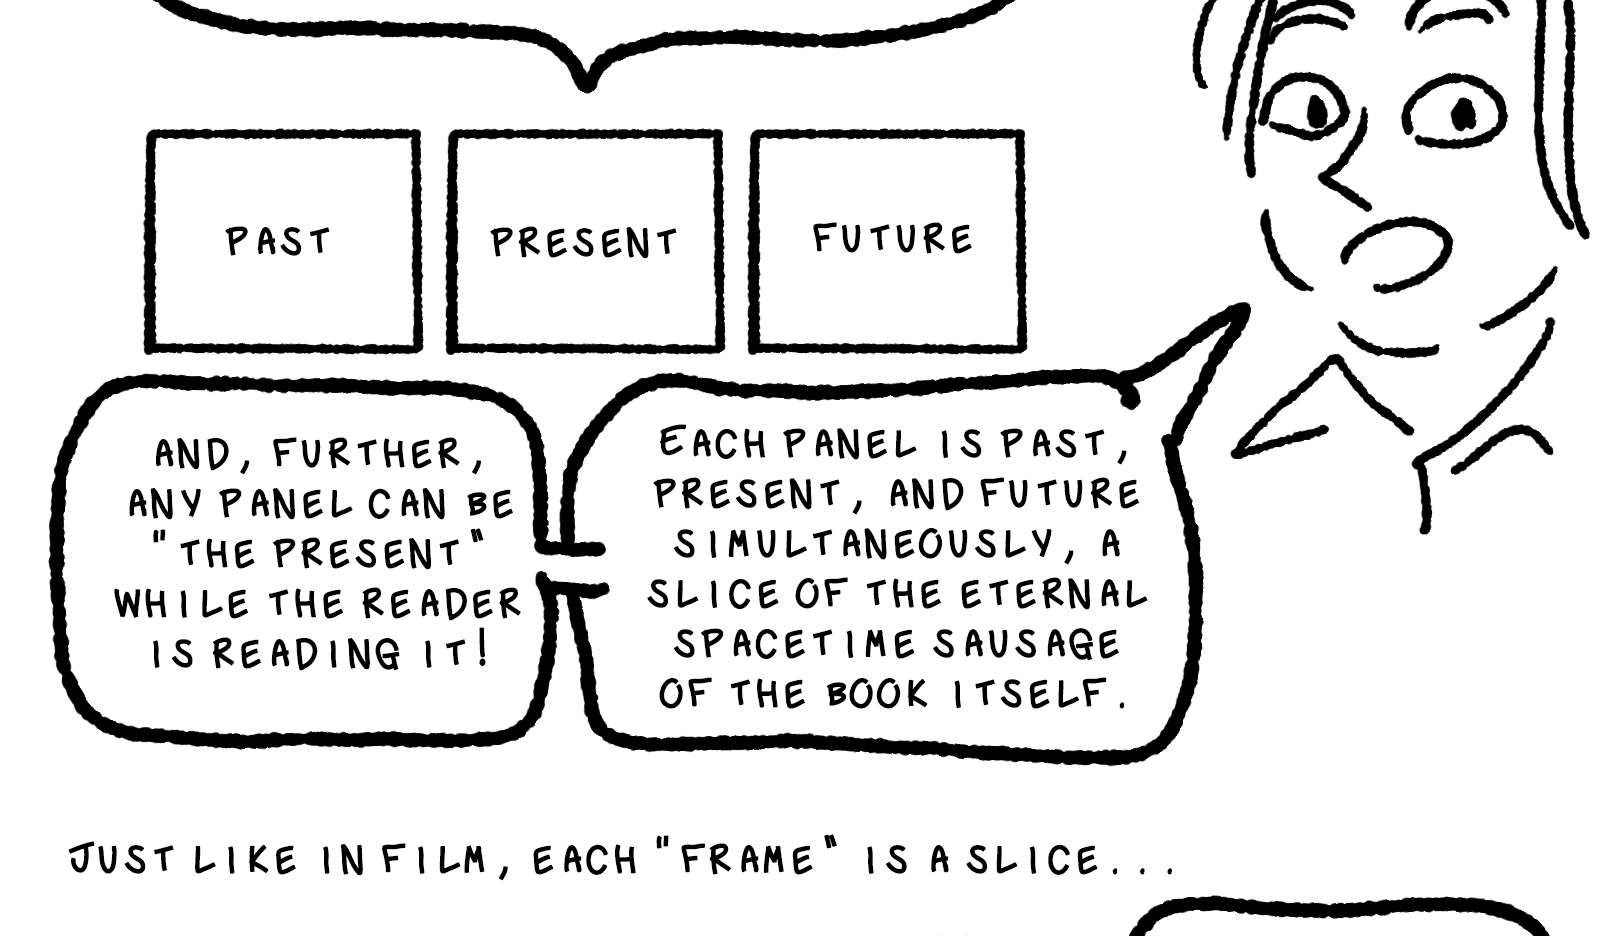 A bracket surrounds the minkowski space diagram, and leads to three frames in sequence, reading sequentially from left to right: past, present, future. Elk continues: Further, any panel can be 'the present' while the reader is reading it! Each panel is past, present, and future simultaneously, a slice of the eternal spacetime sausage of the book itself.